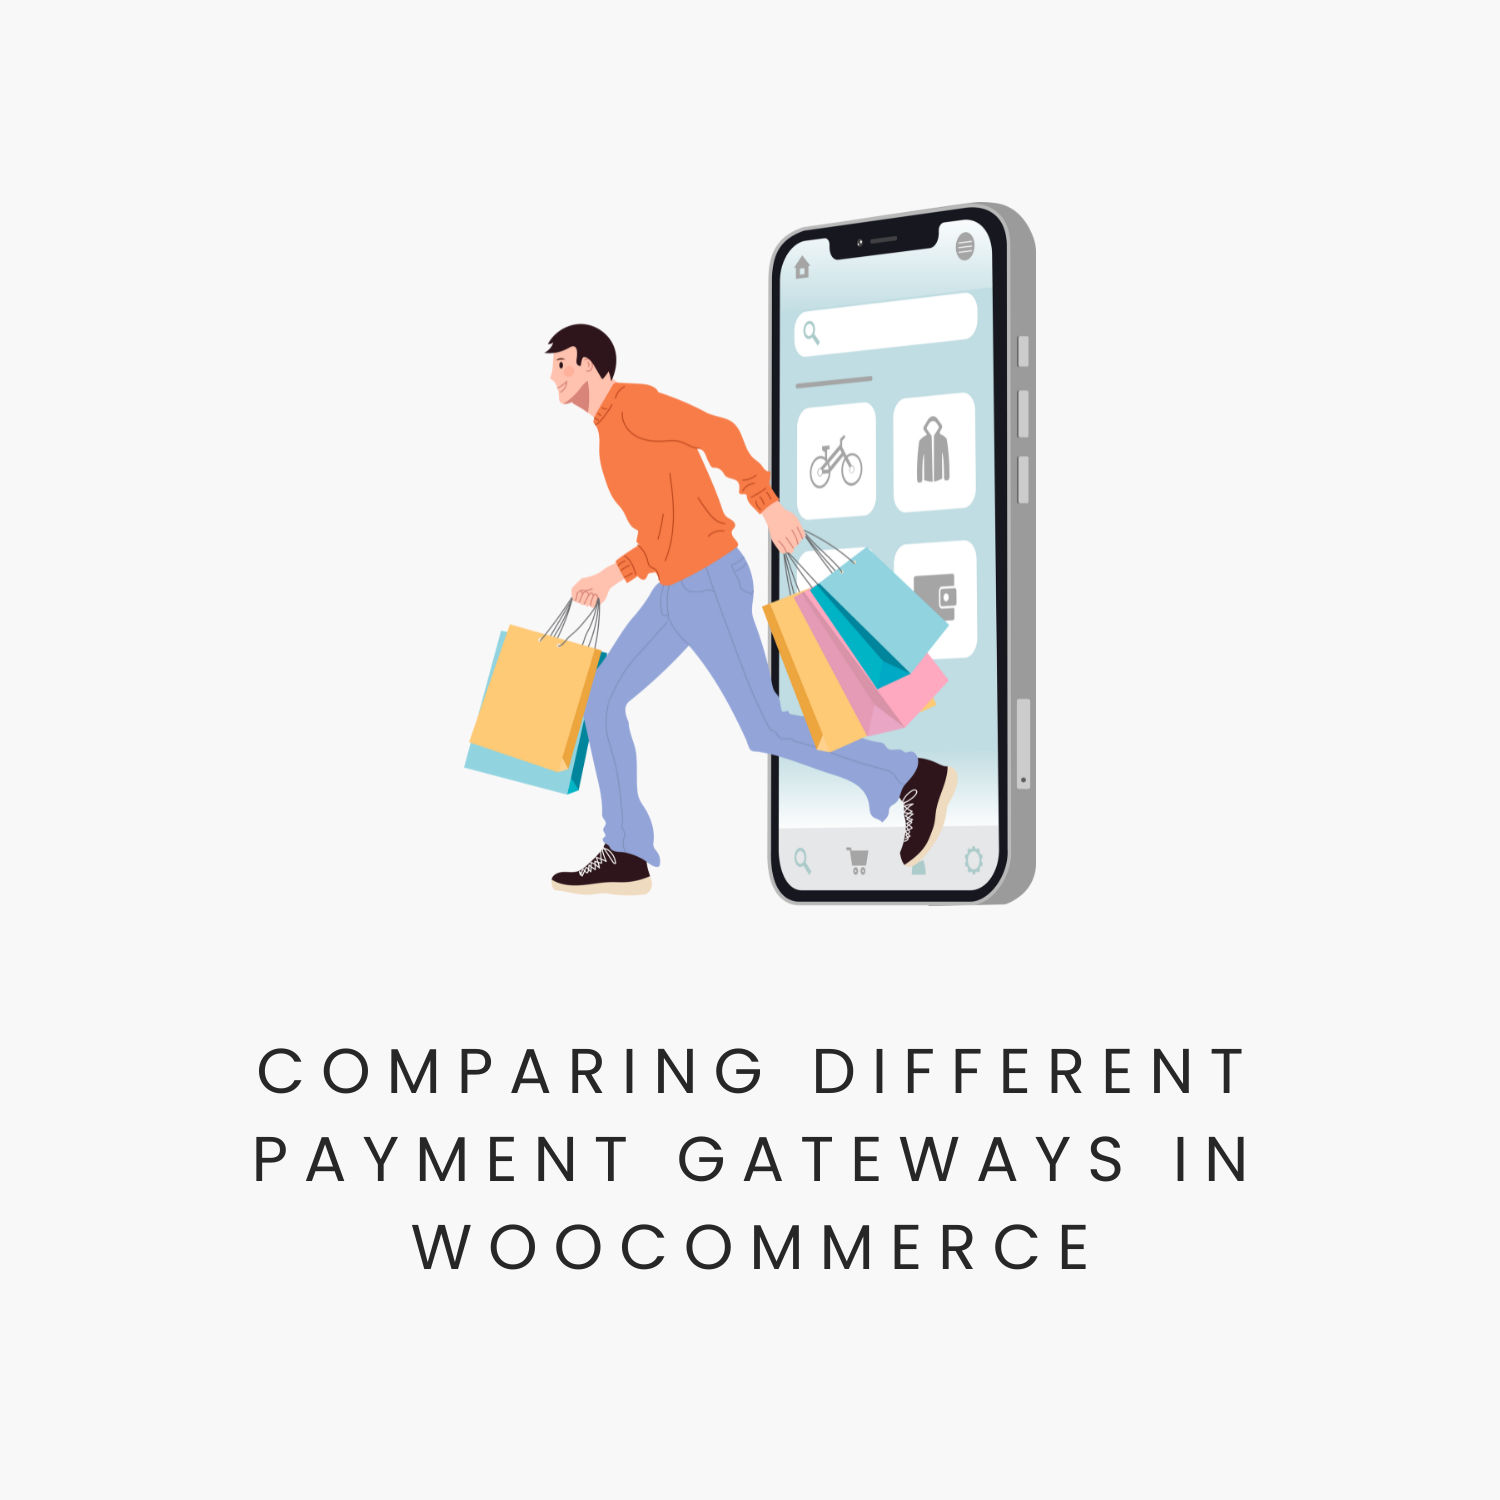 Comparing different payment gateways in WooCommerce